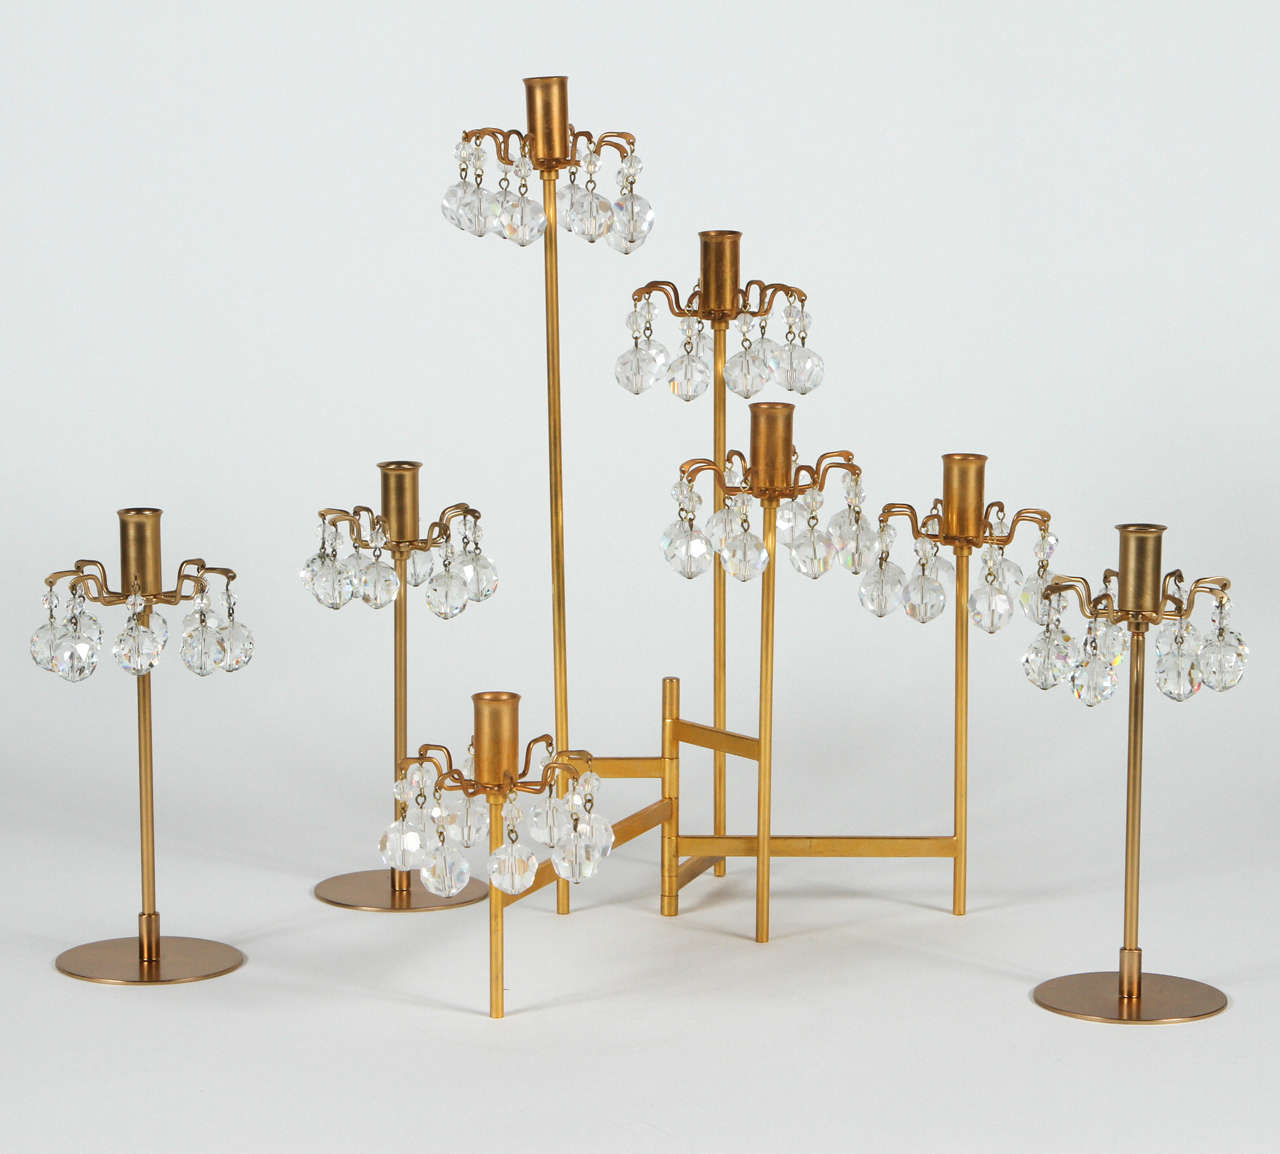 Grouping of gold-plated Lobmeyr candelabrum with crystals. The larger adjustable five-arm is of the Met series by Hans Harald Rath, the designer of the 1966 Metropolitan chandeliers for the new Metropolitan Opera House, New York. Signed.

Visit